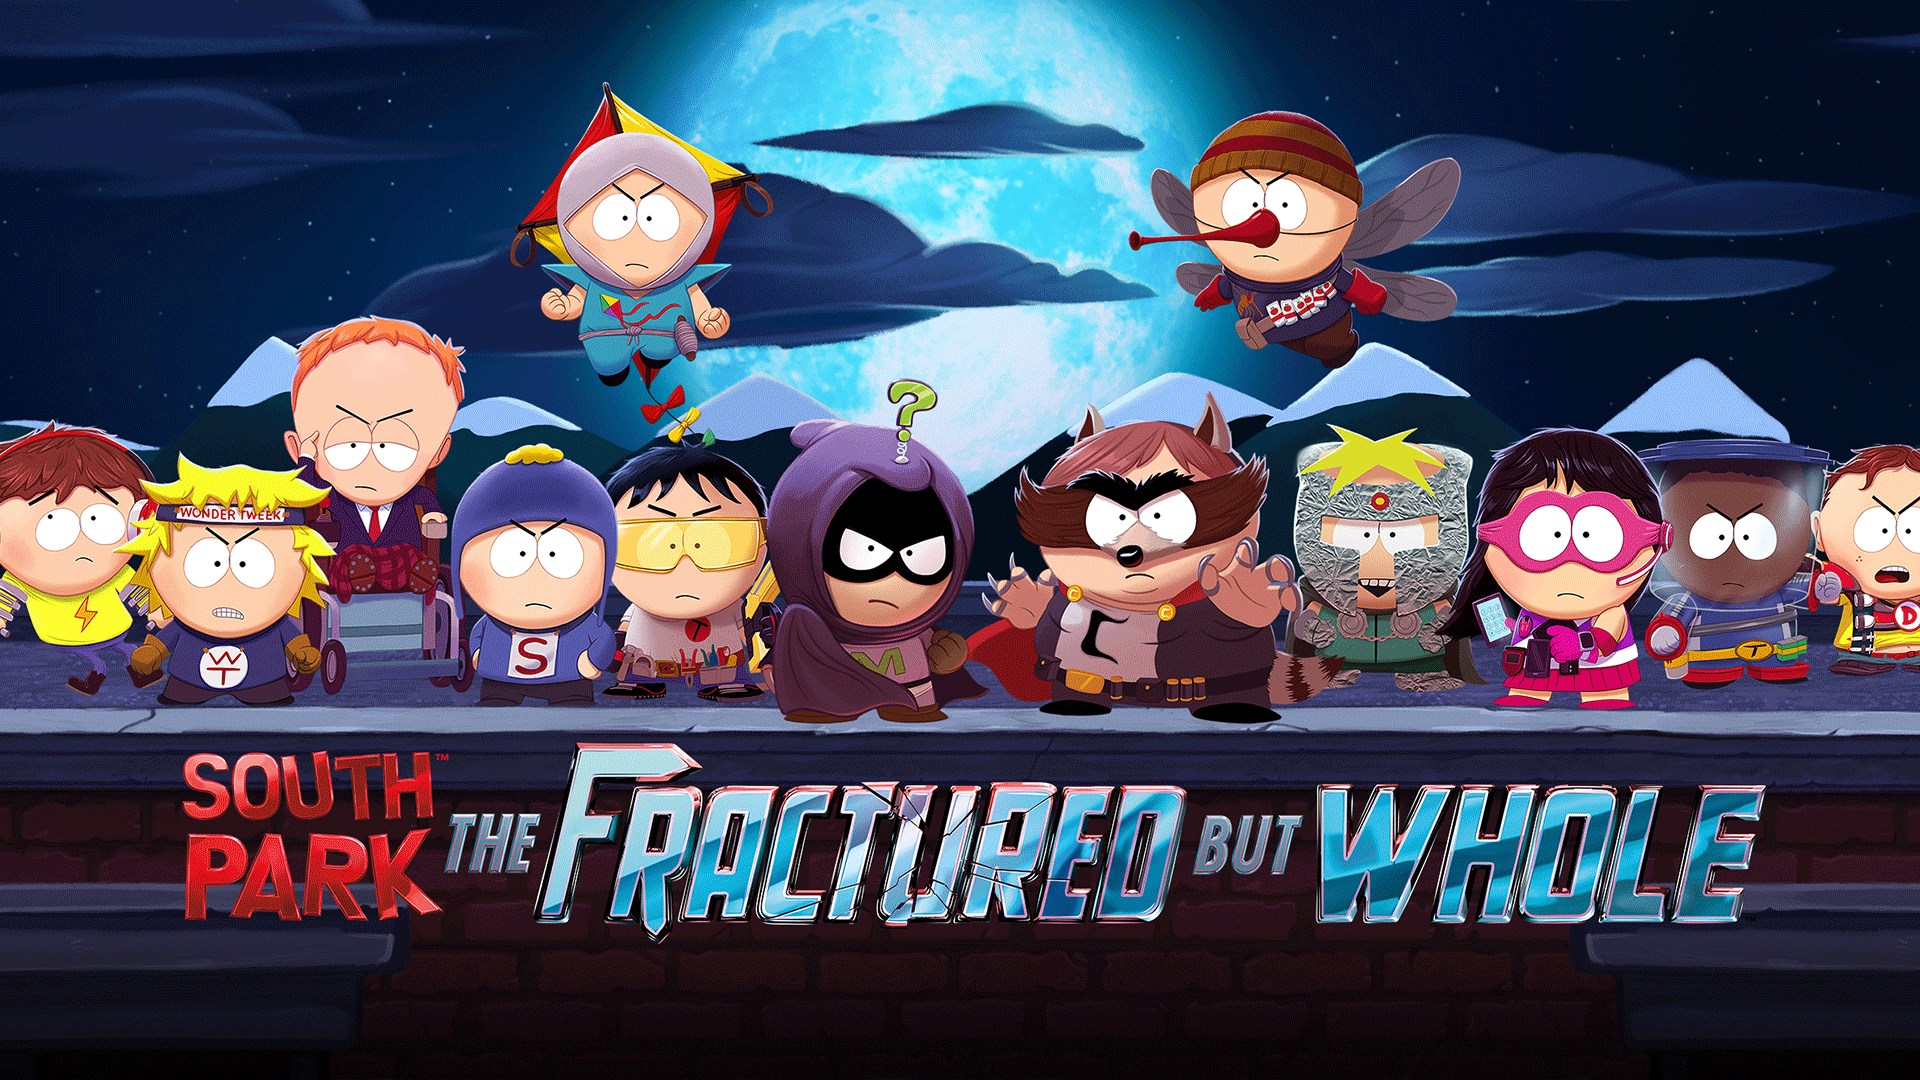 South park the fractured but whole купить ключ стим фото 85